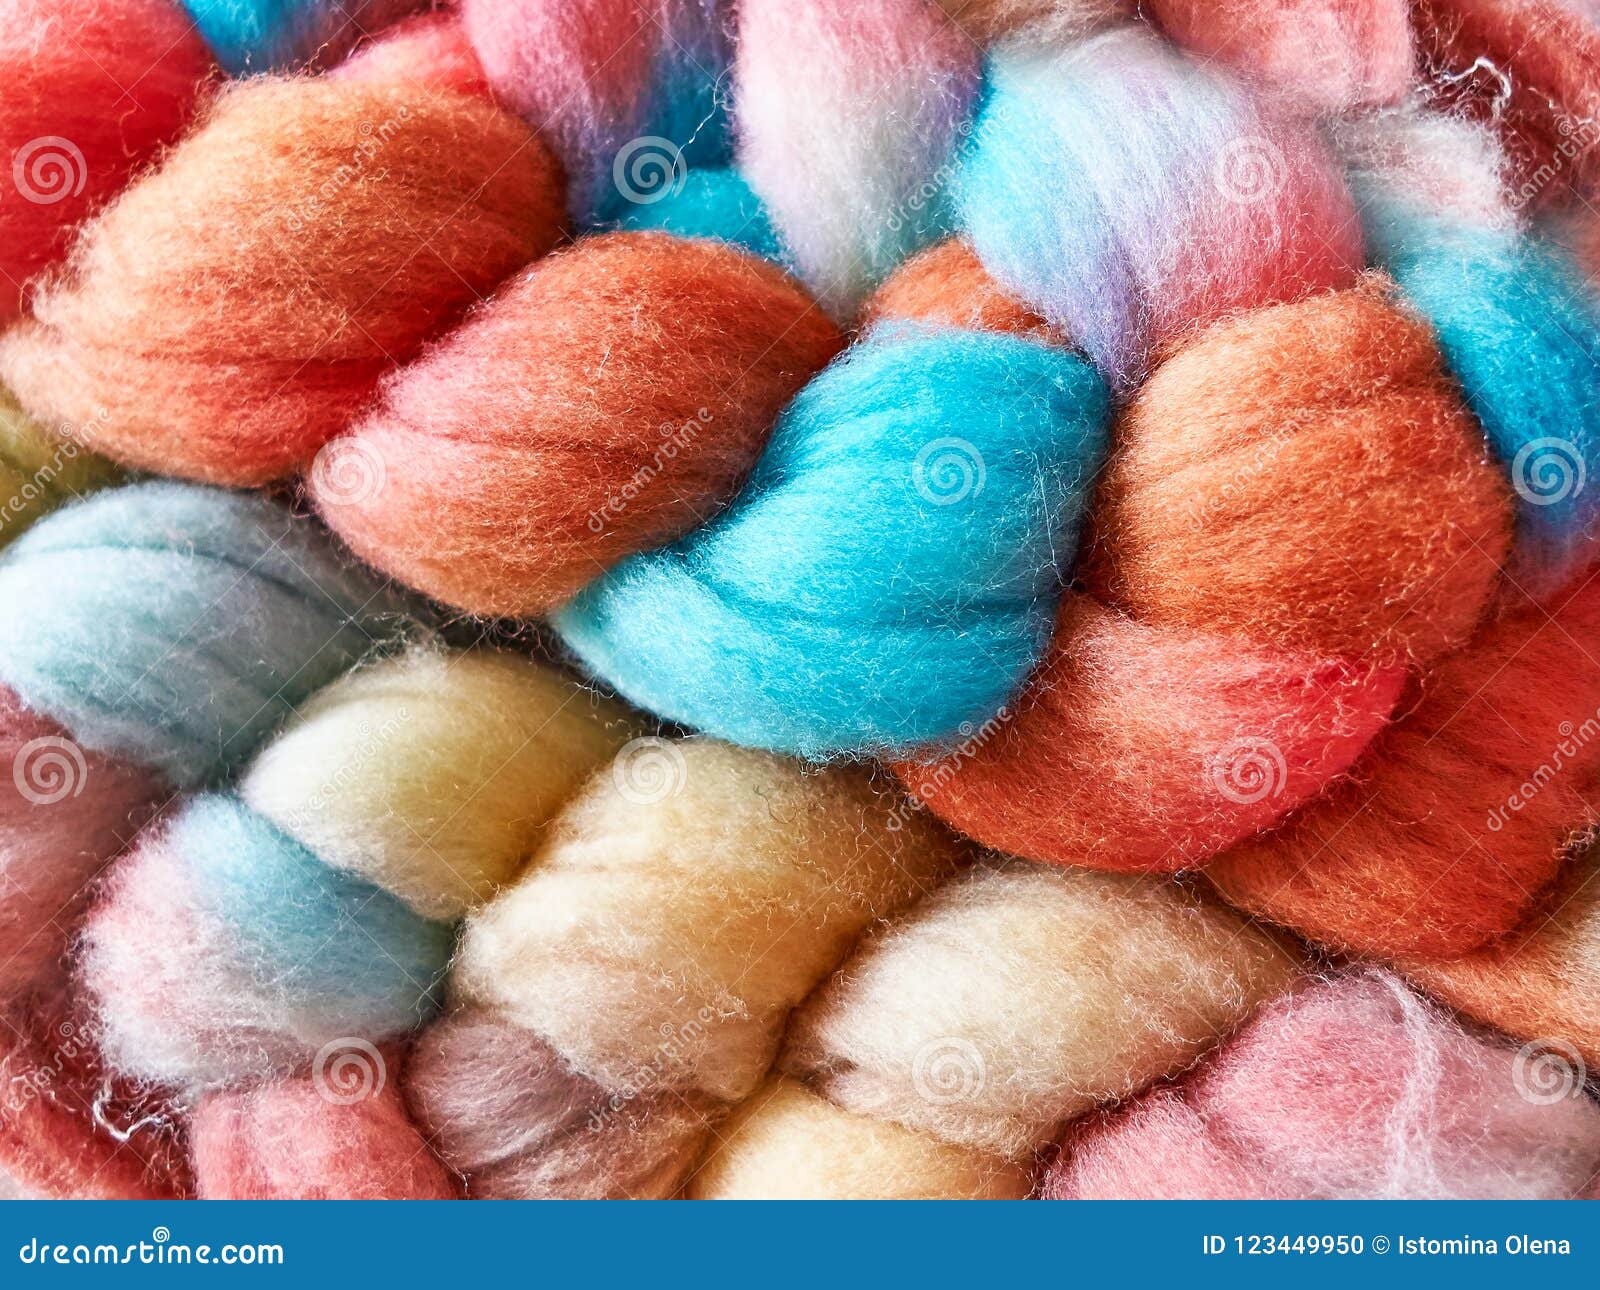 56,477 Colorful Yarn Stock Photos - Free & Royalty-Free Stock Photos from  Dreamstime